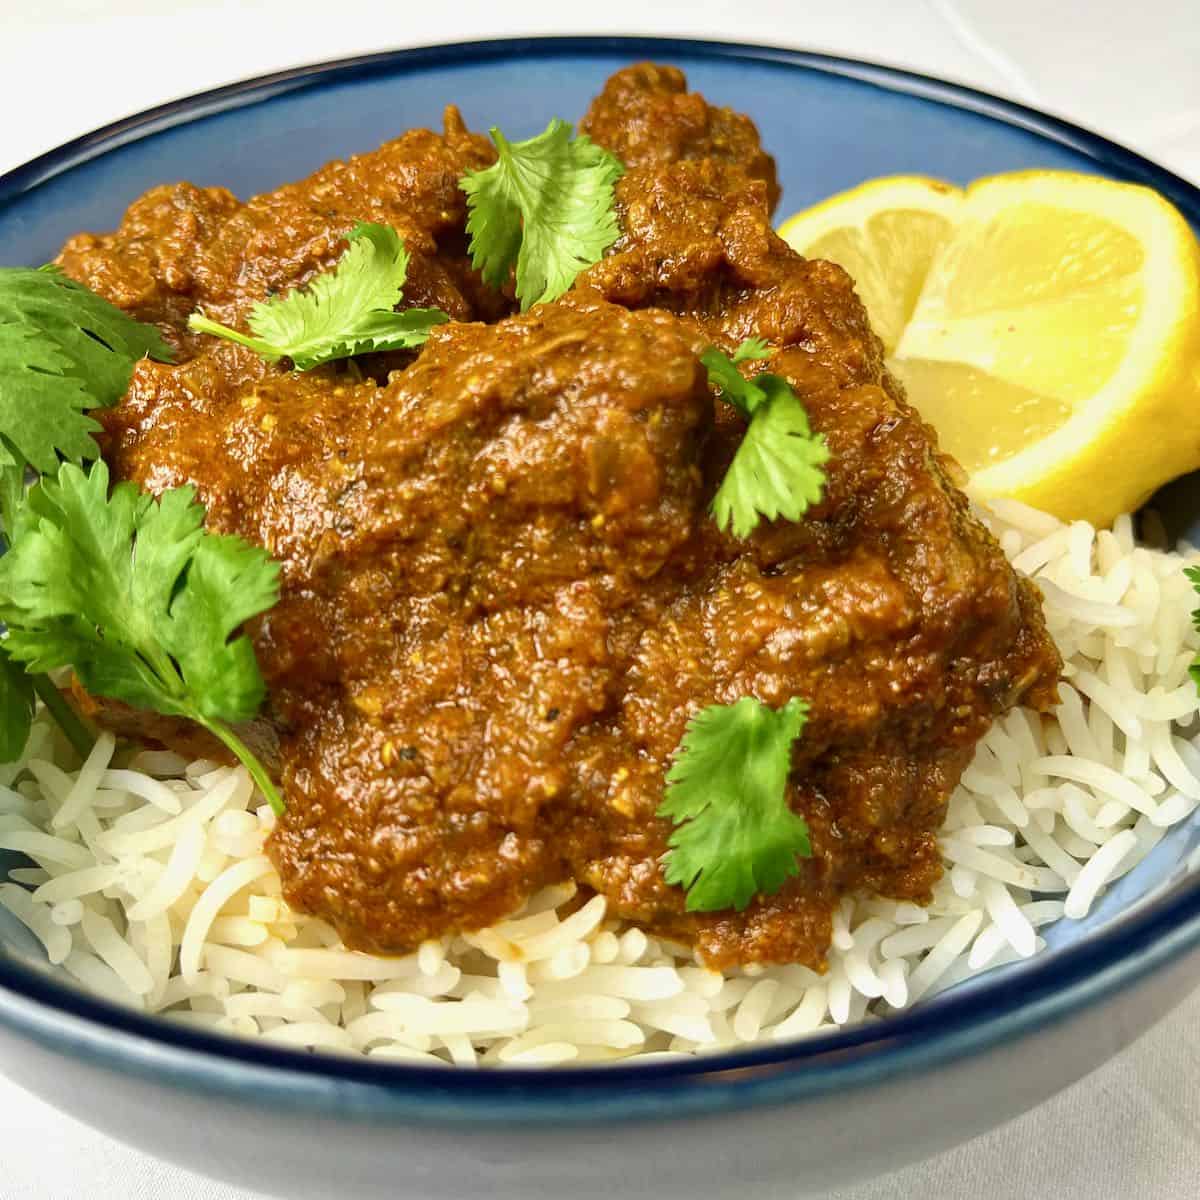 Easy Lamb Vindaloo served on a bed of steamed basmati rice with a wedge of lemon